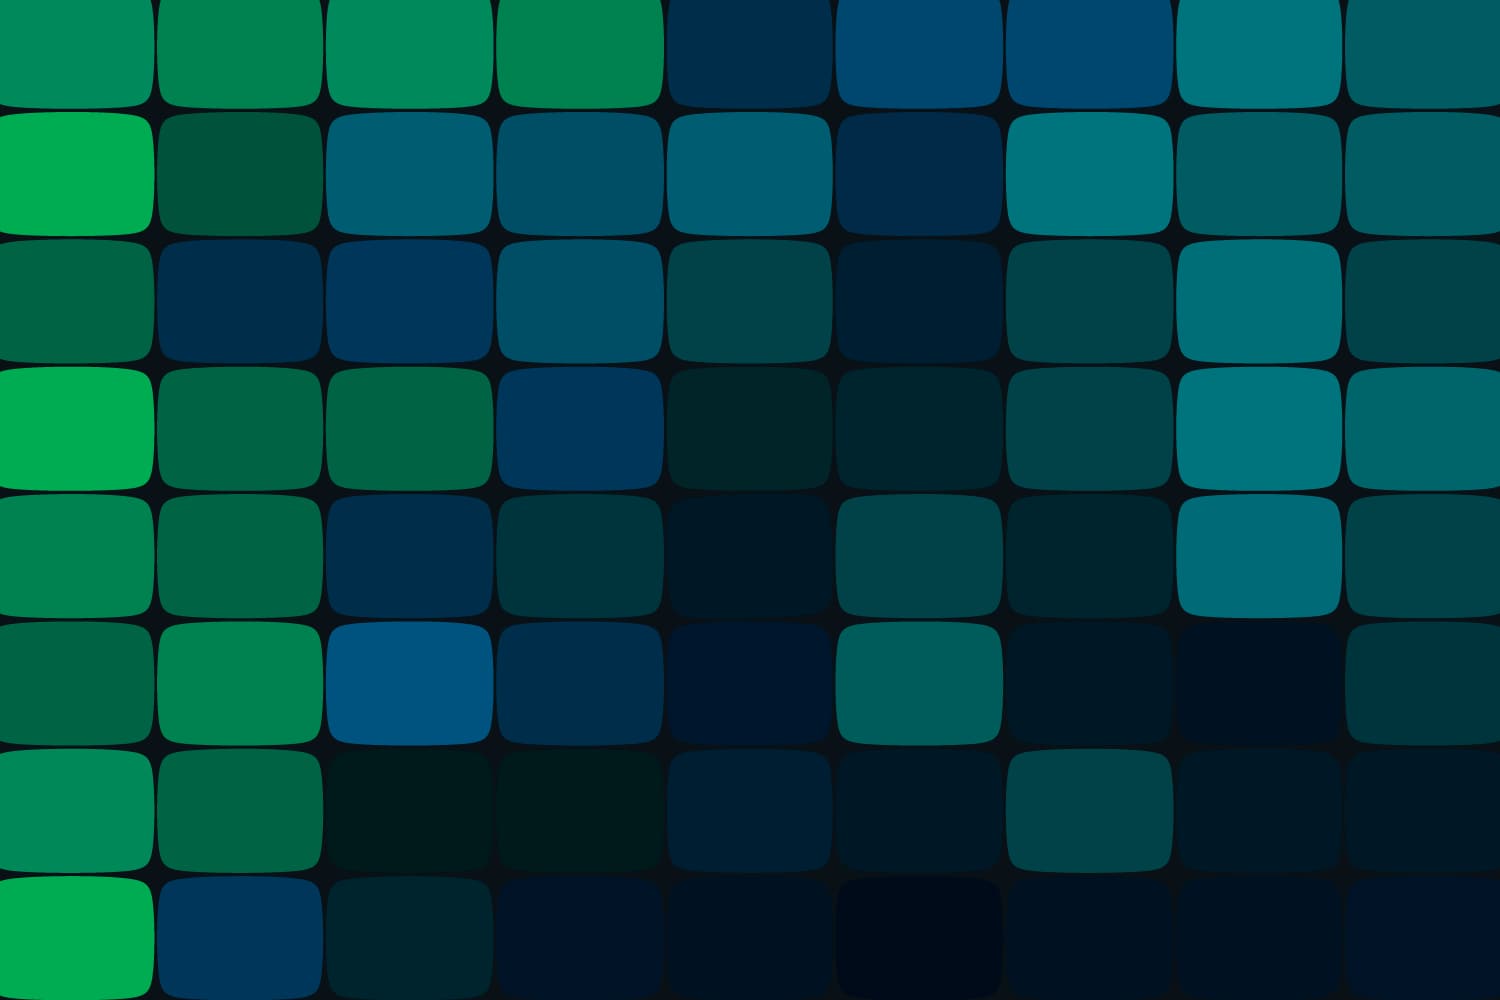 Green and blue blocks stacked in rows